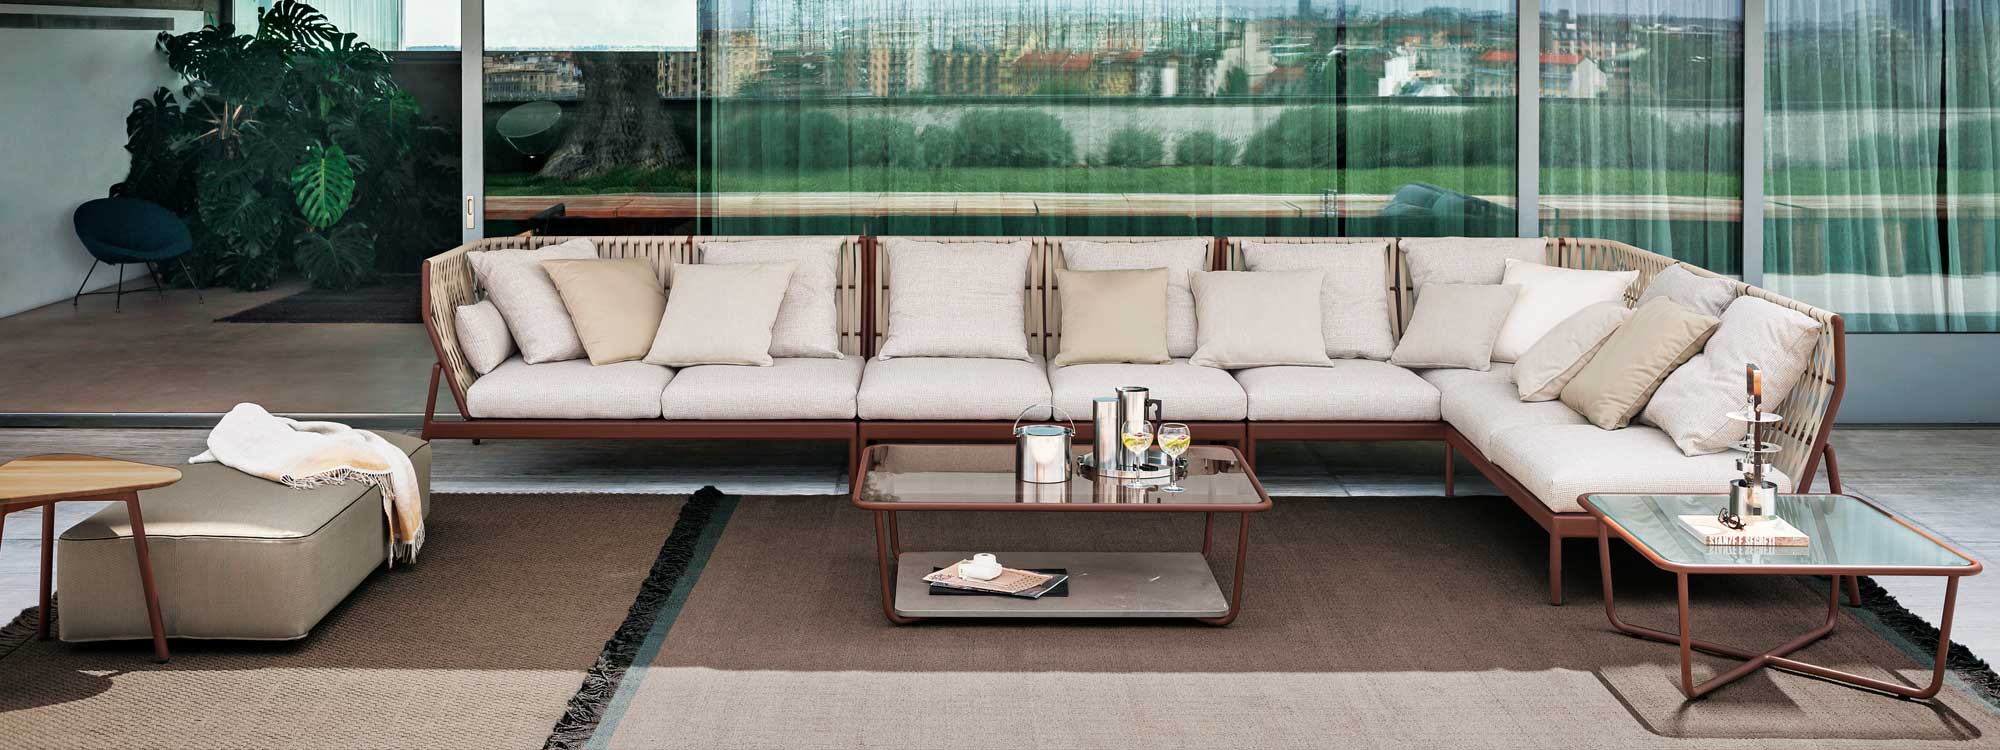 Image of Piper large outdoor corner sofa with rust-colored frame and taupe cushions by RODA, shown on terrace covered with outdoor rugs